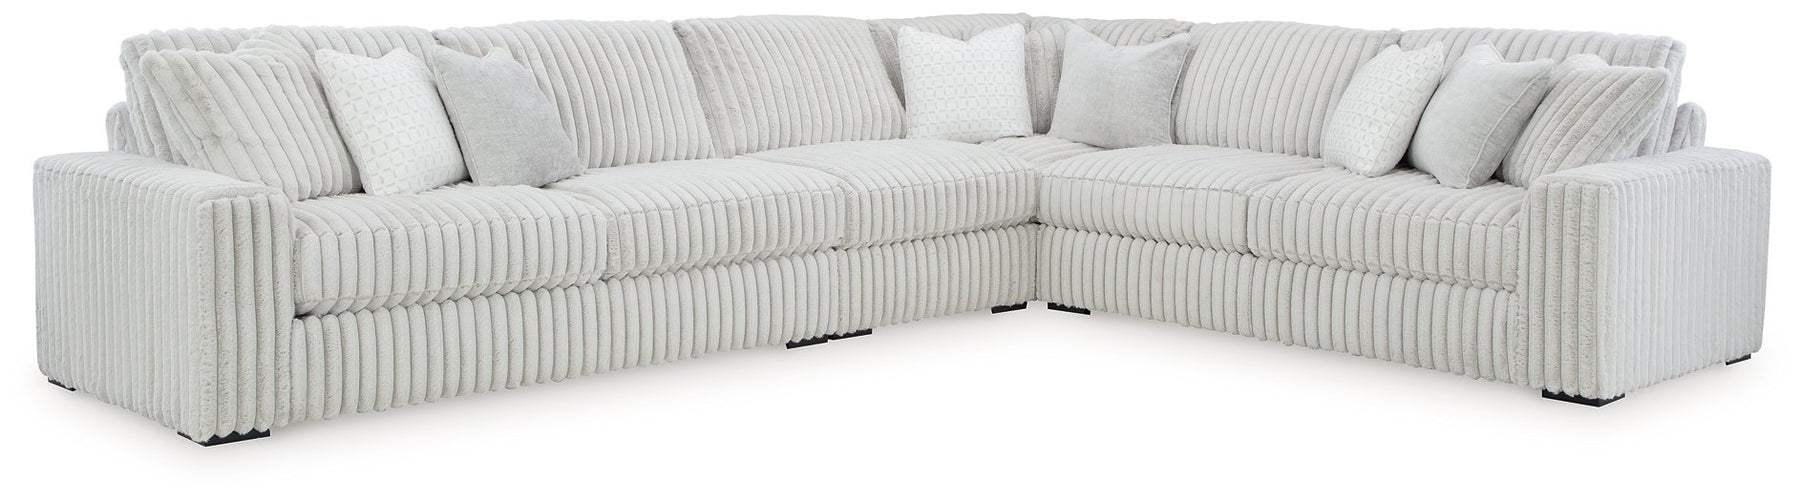 Stupendous Sectional - Half Price Furniture